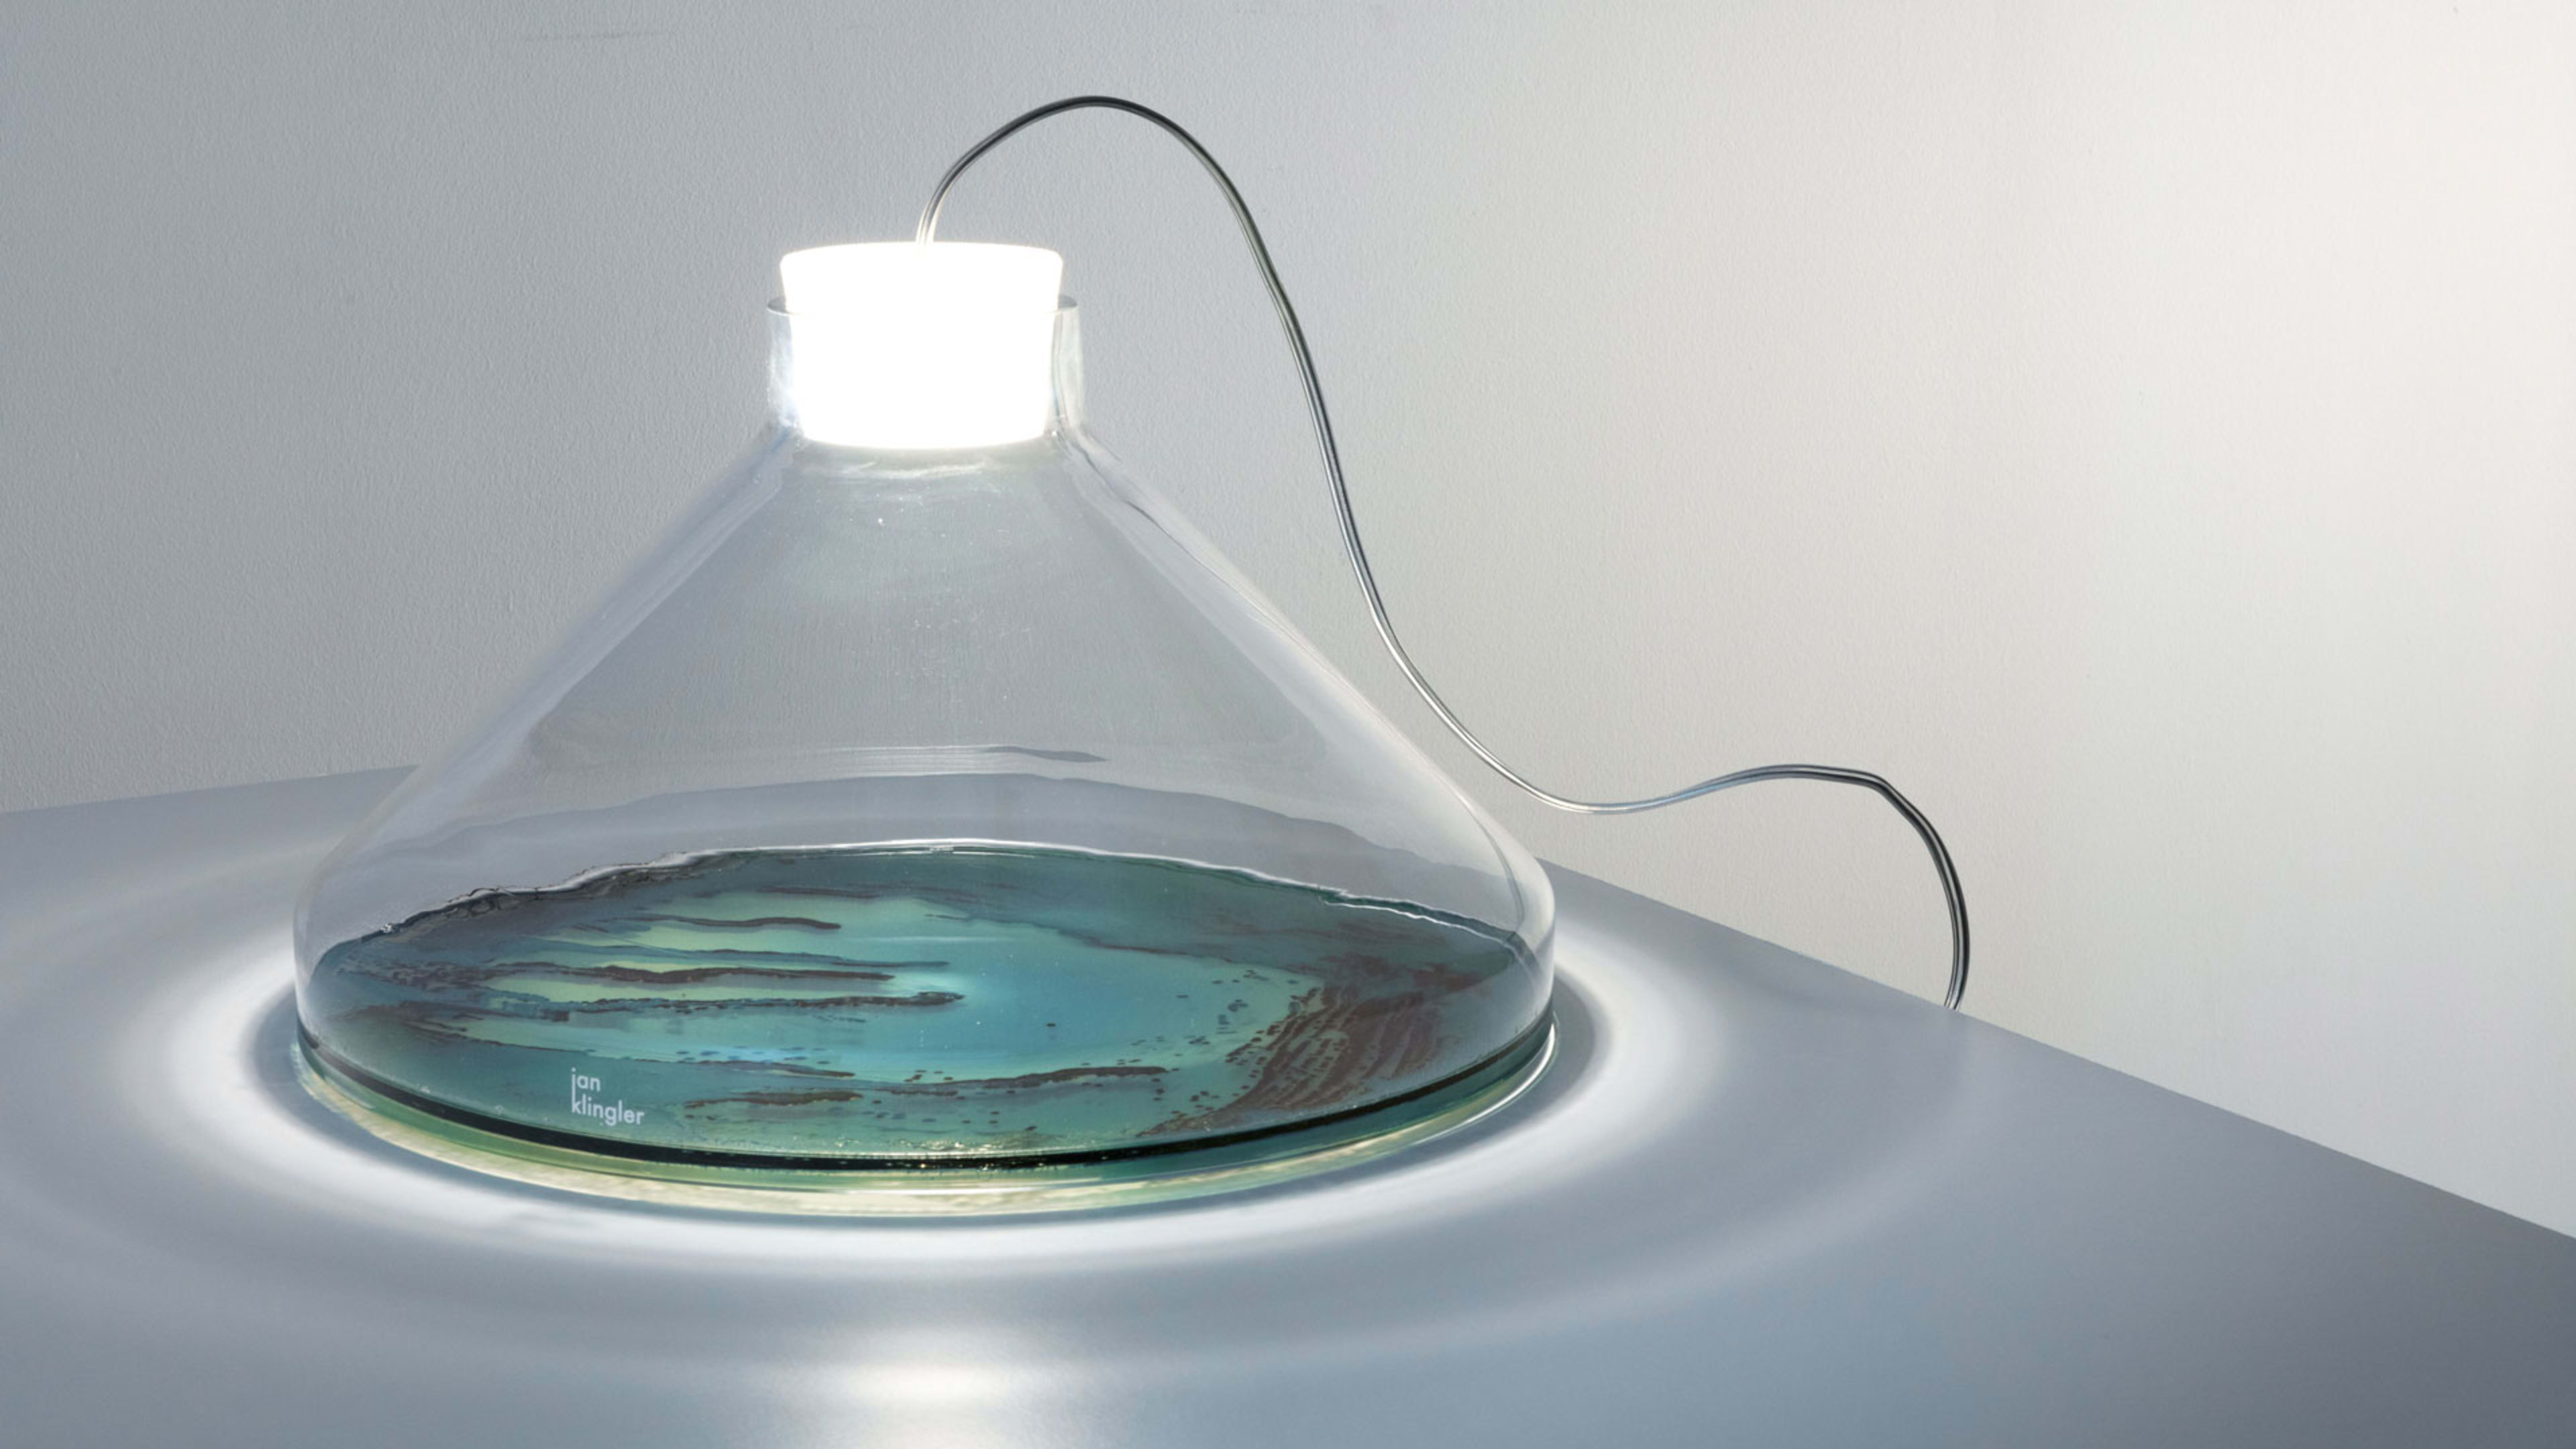 These lamps preserve the bacteria of your favorite people, pets, and places